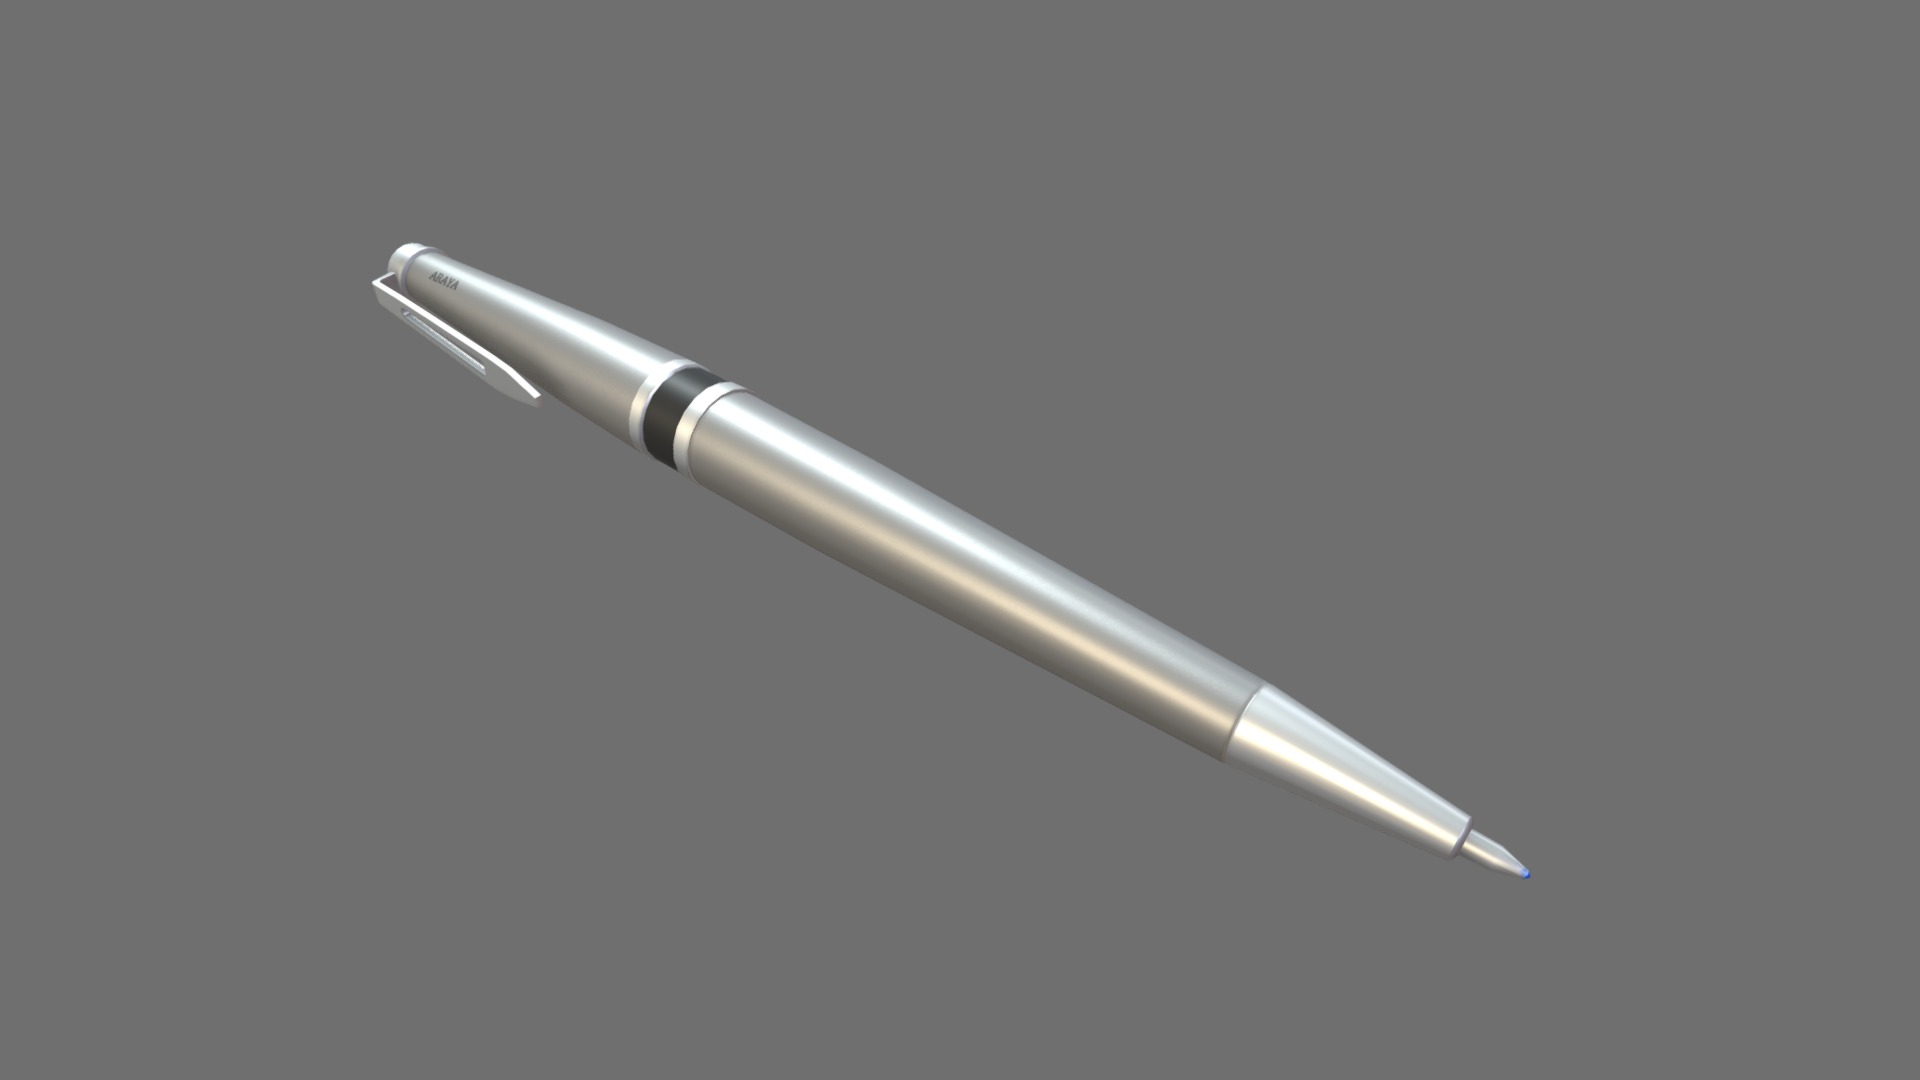 3D model Pen model - This is a 3D model of the Pen model. The 3D model is about a silver and black pen.